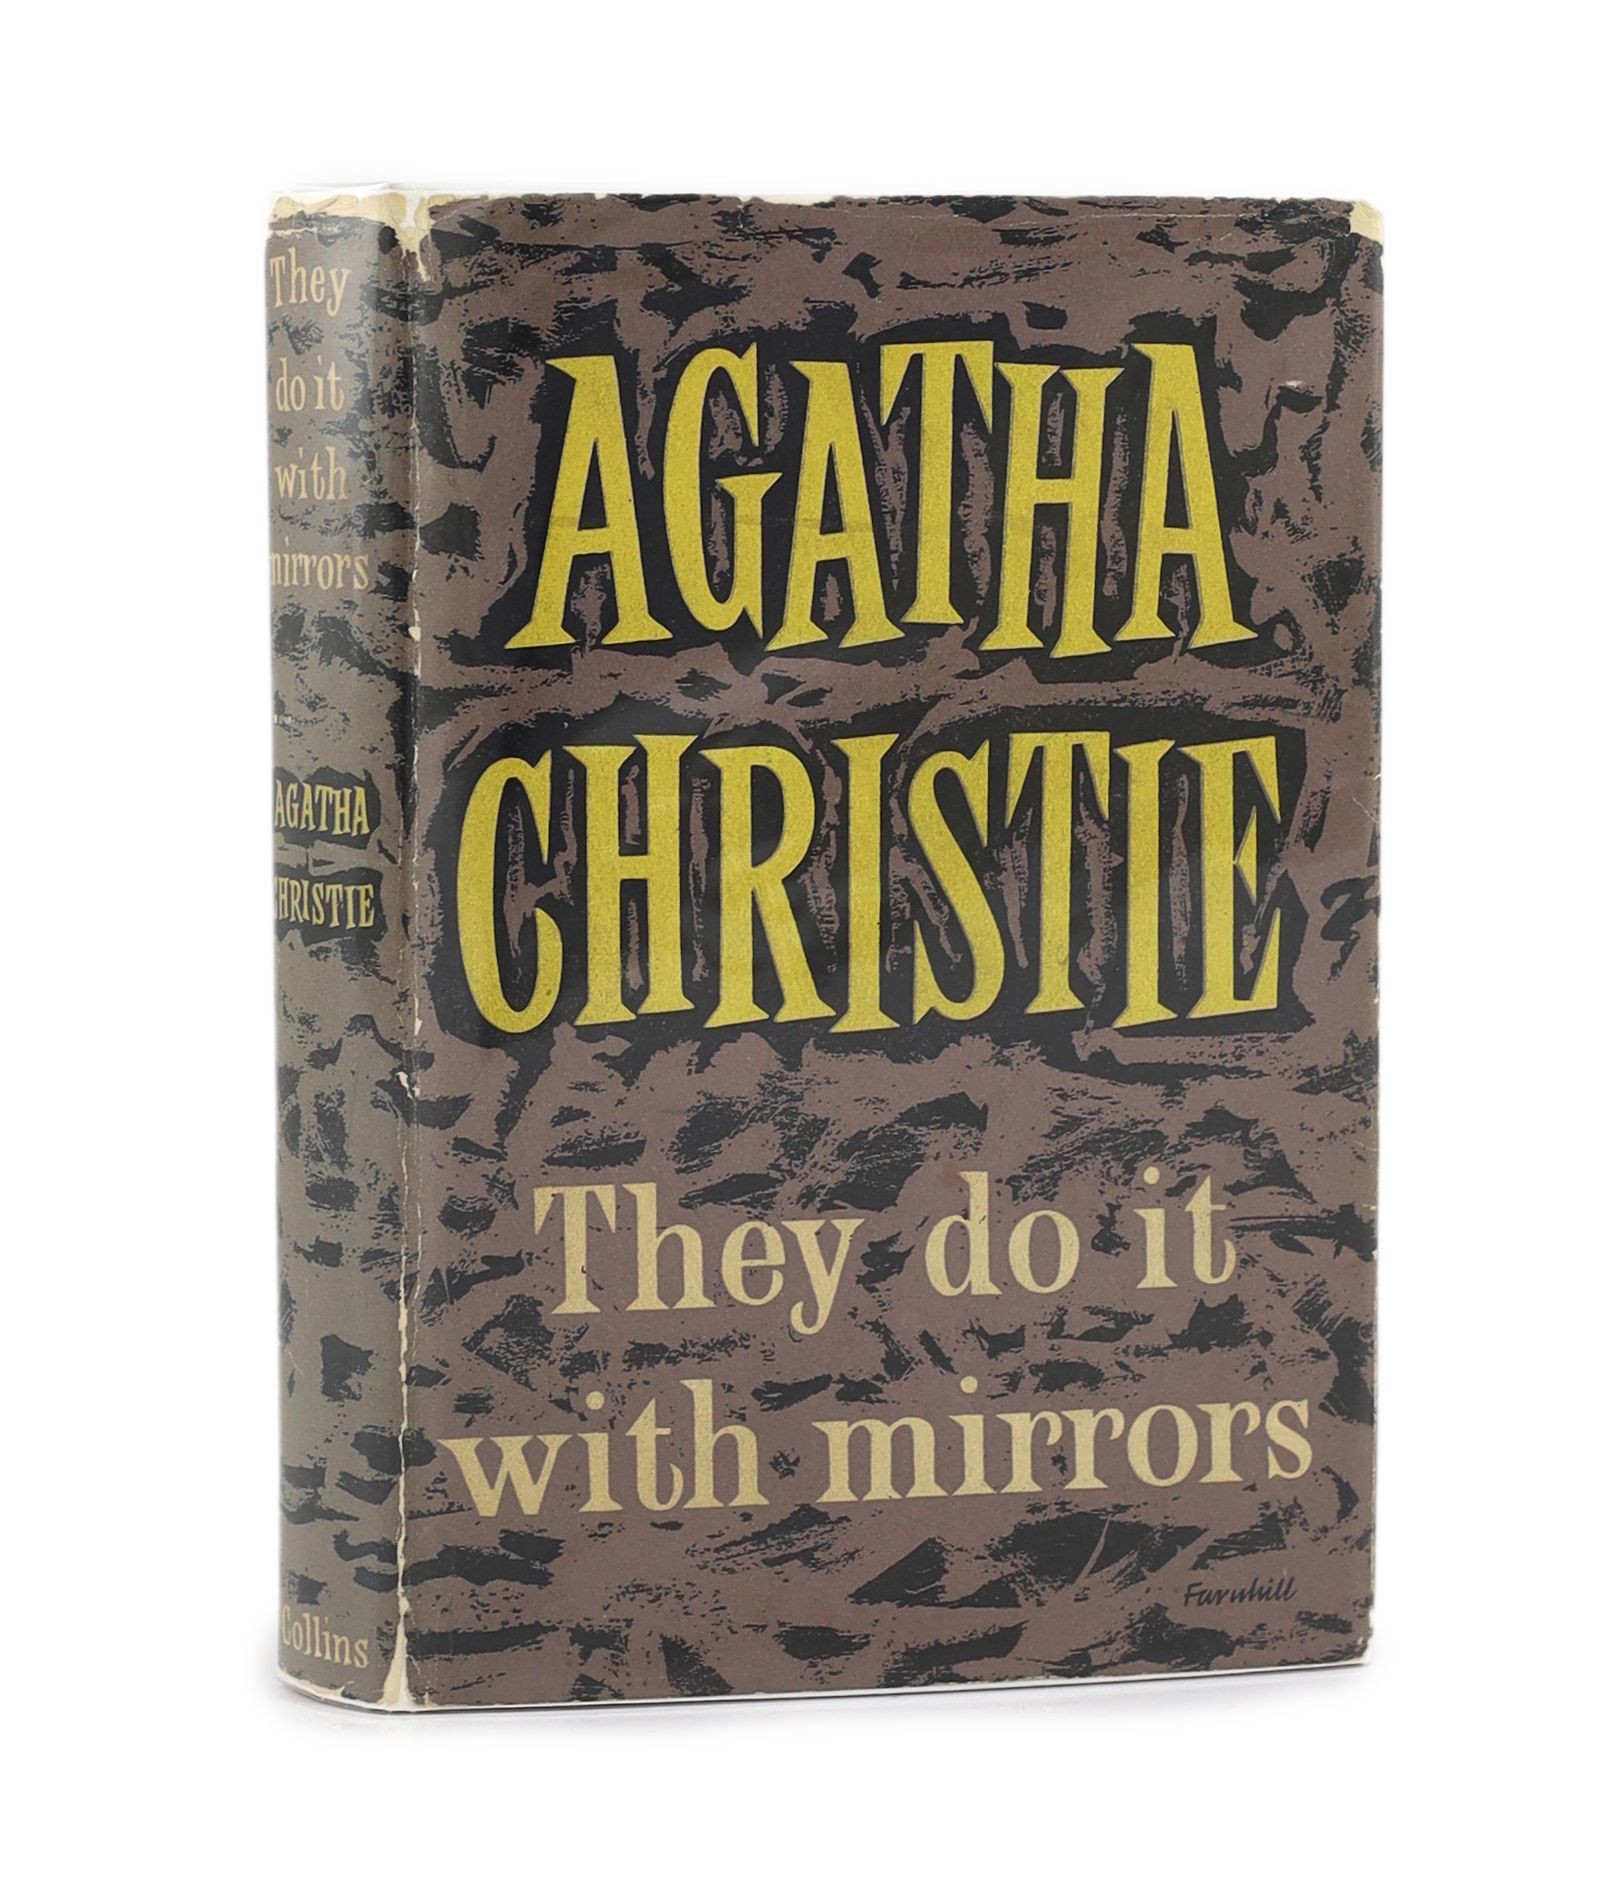 Christie, Agatha - They do it with Mirrors, 1st edition